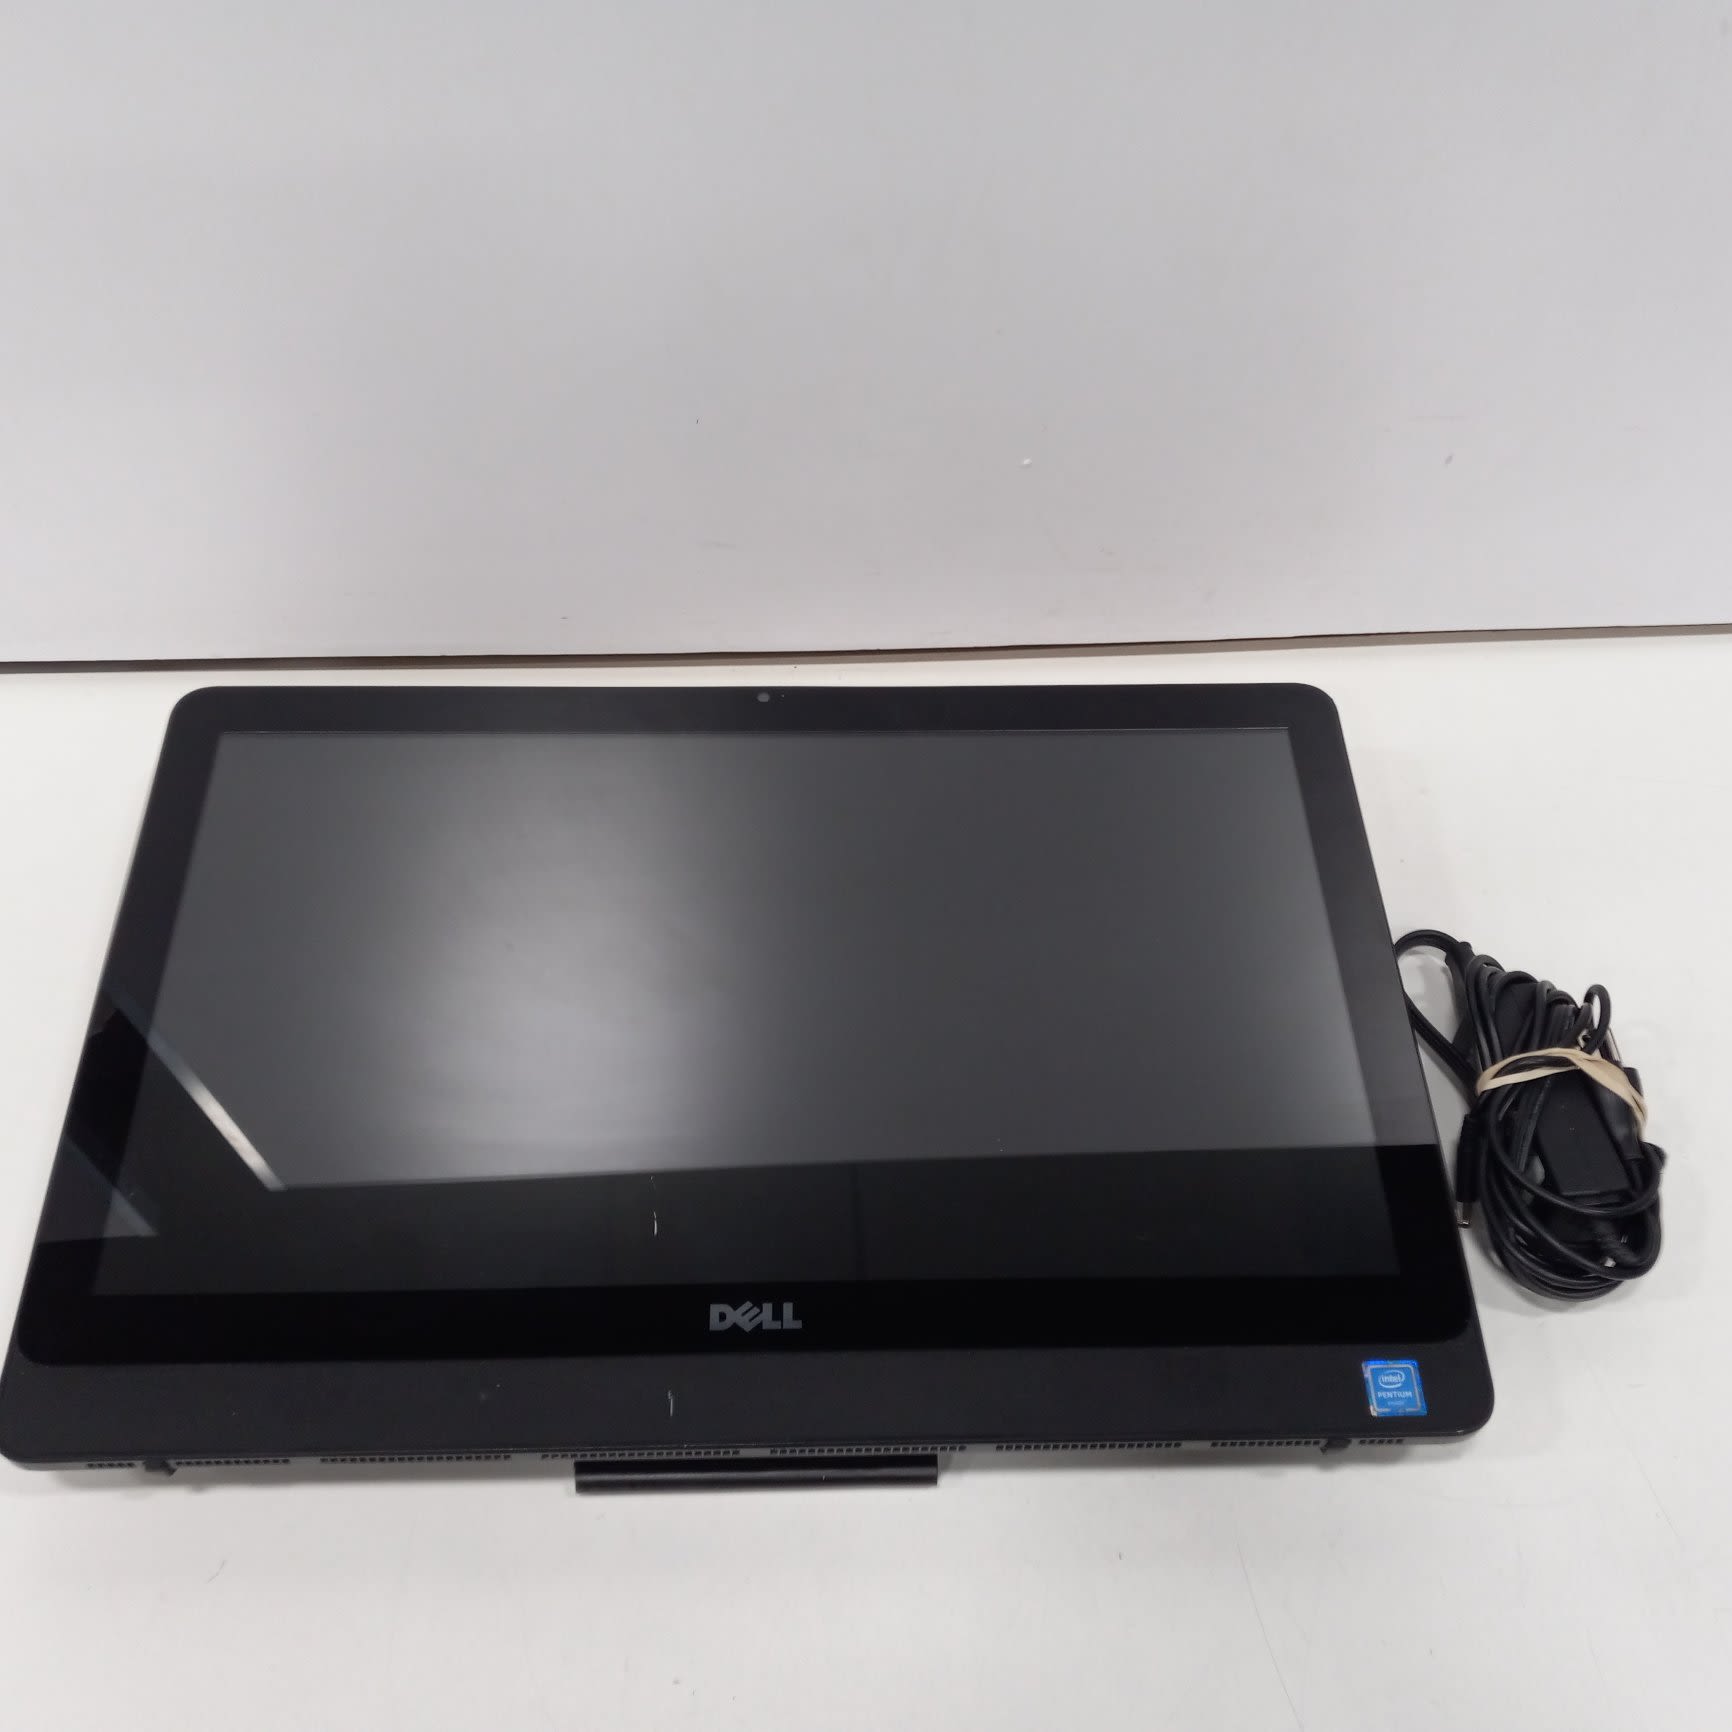 Buy Dell Inspiron 20 Model 3052 Series AIO for USD 109.99 | GoodwillFinds